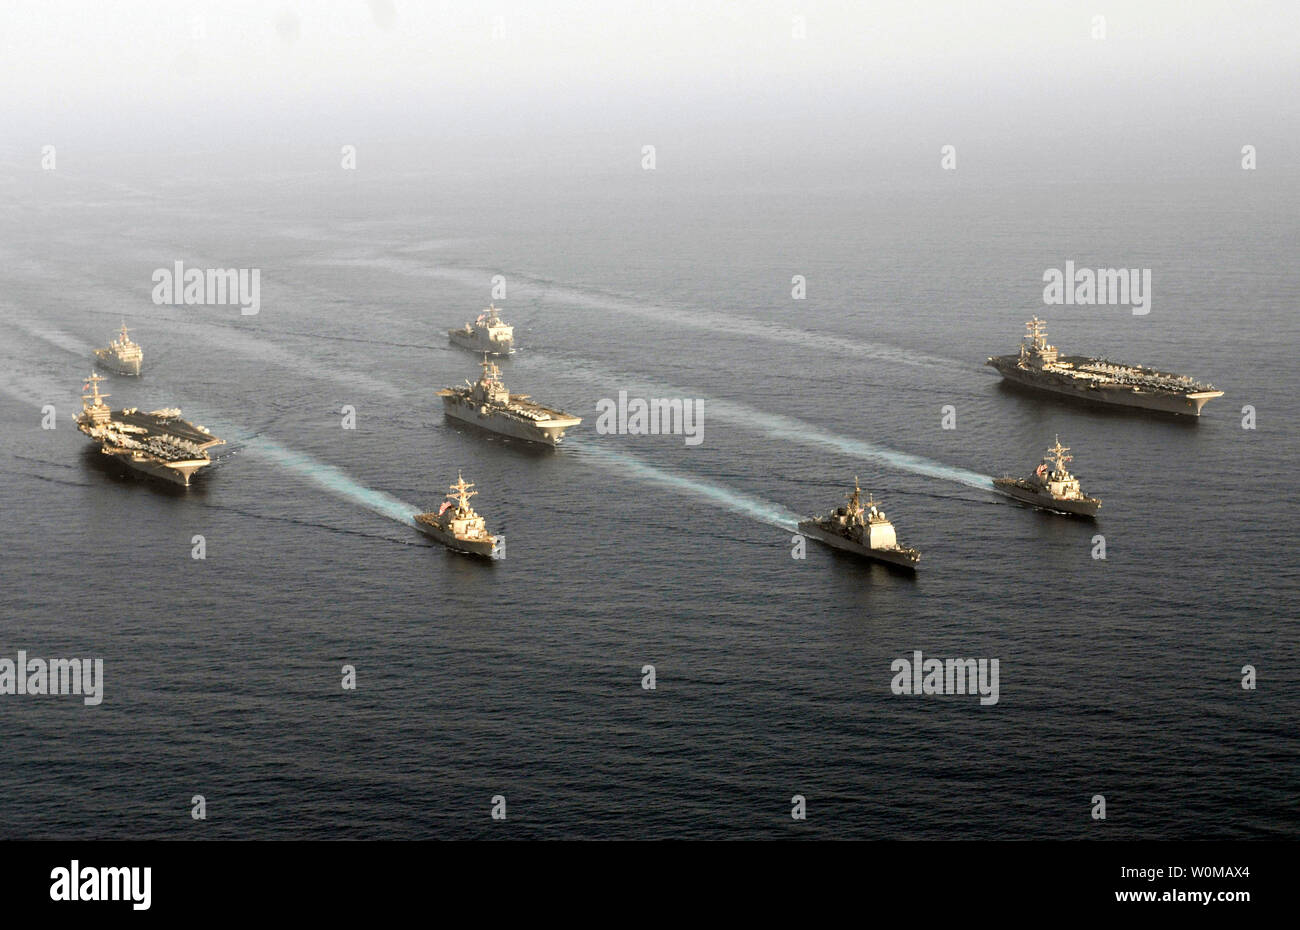 Ships assigned to the John C. Stennis Carrier Strike Group, Nimitz Carrier Strike Group, and the Bonhomme Richard Expeditionary Strike Group steam through the Gulf of Oman on May 22, 2007. The three strike groups support Maritime operations set the conditions for security and stability, as well as complement counter-terrorism and security efforts to regional nations. This group is the largest daytime assembly of U.S. warships in the Gulf since the 2003 and will hold drills off Iran's coast in a U.S. show of force to reassure Gulf security to regional allies. (UPI Photo/Denny Cantrell/U.S. Navy Stock Photo